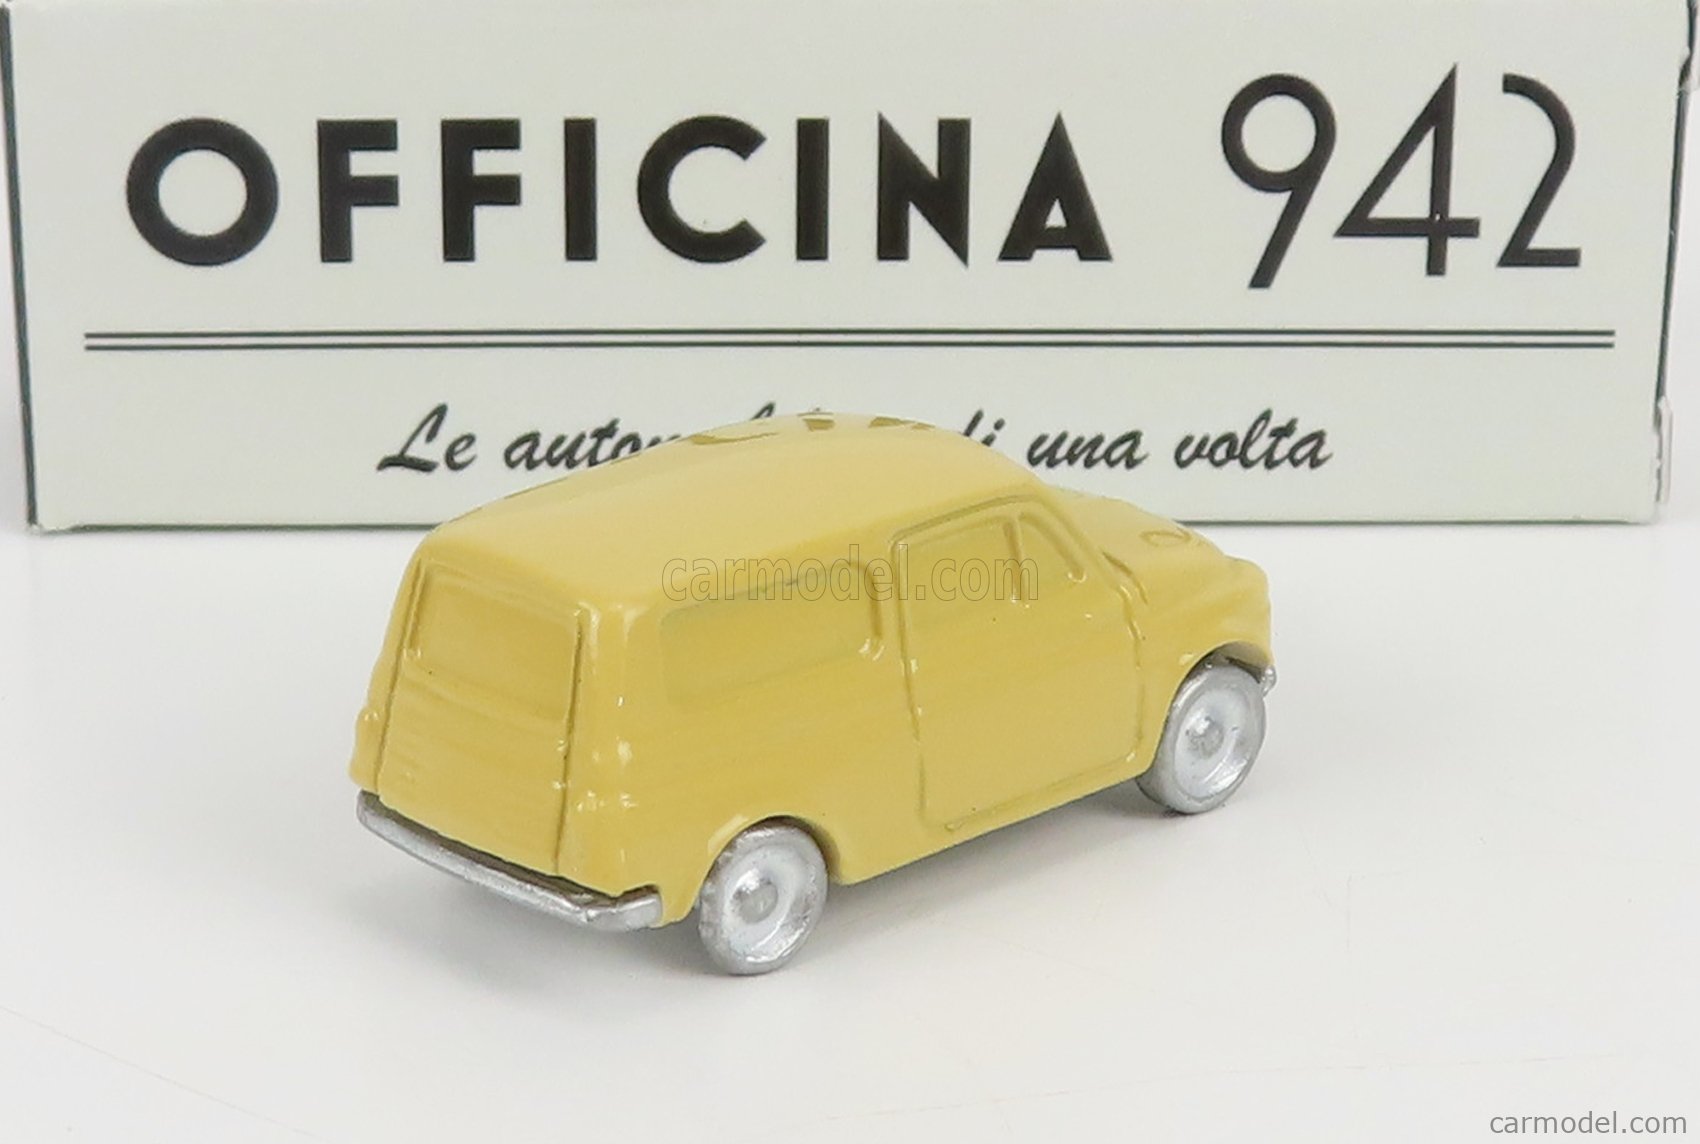 OFFICINA-942 ART2031A Масштаб 1/76  FIAT 500 UTILITY FRANCIS LOMBARDI 1959 BEIGE